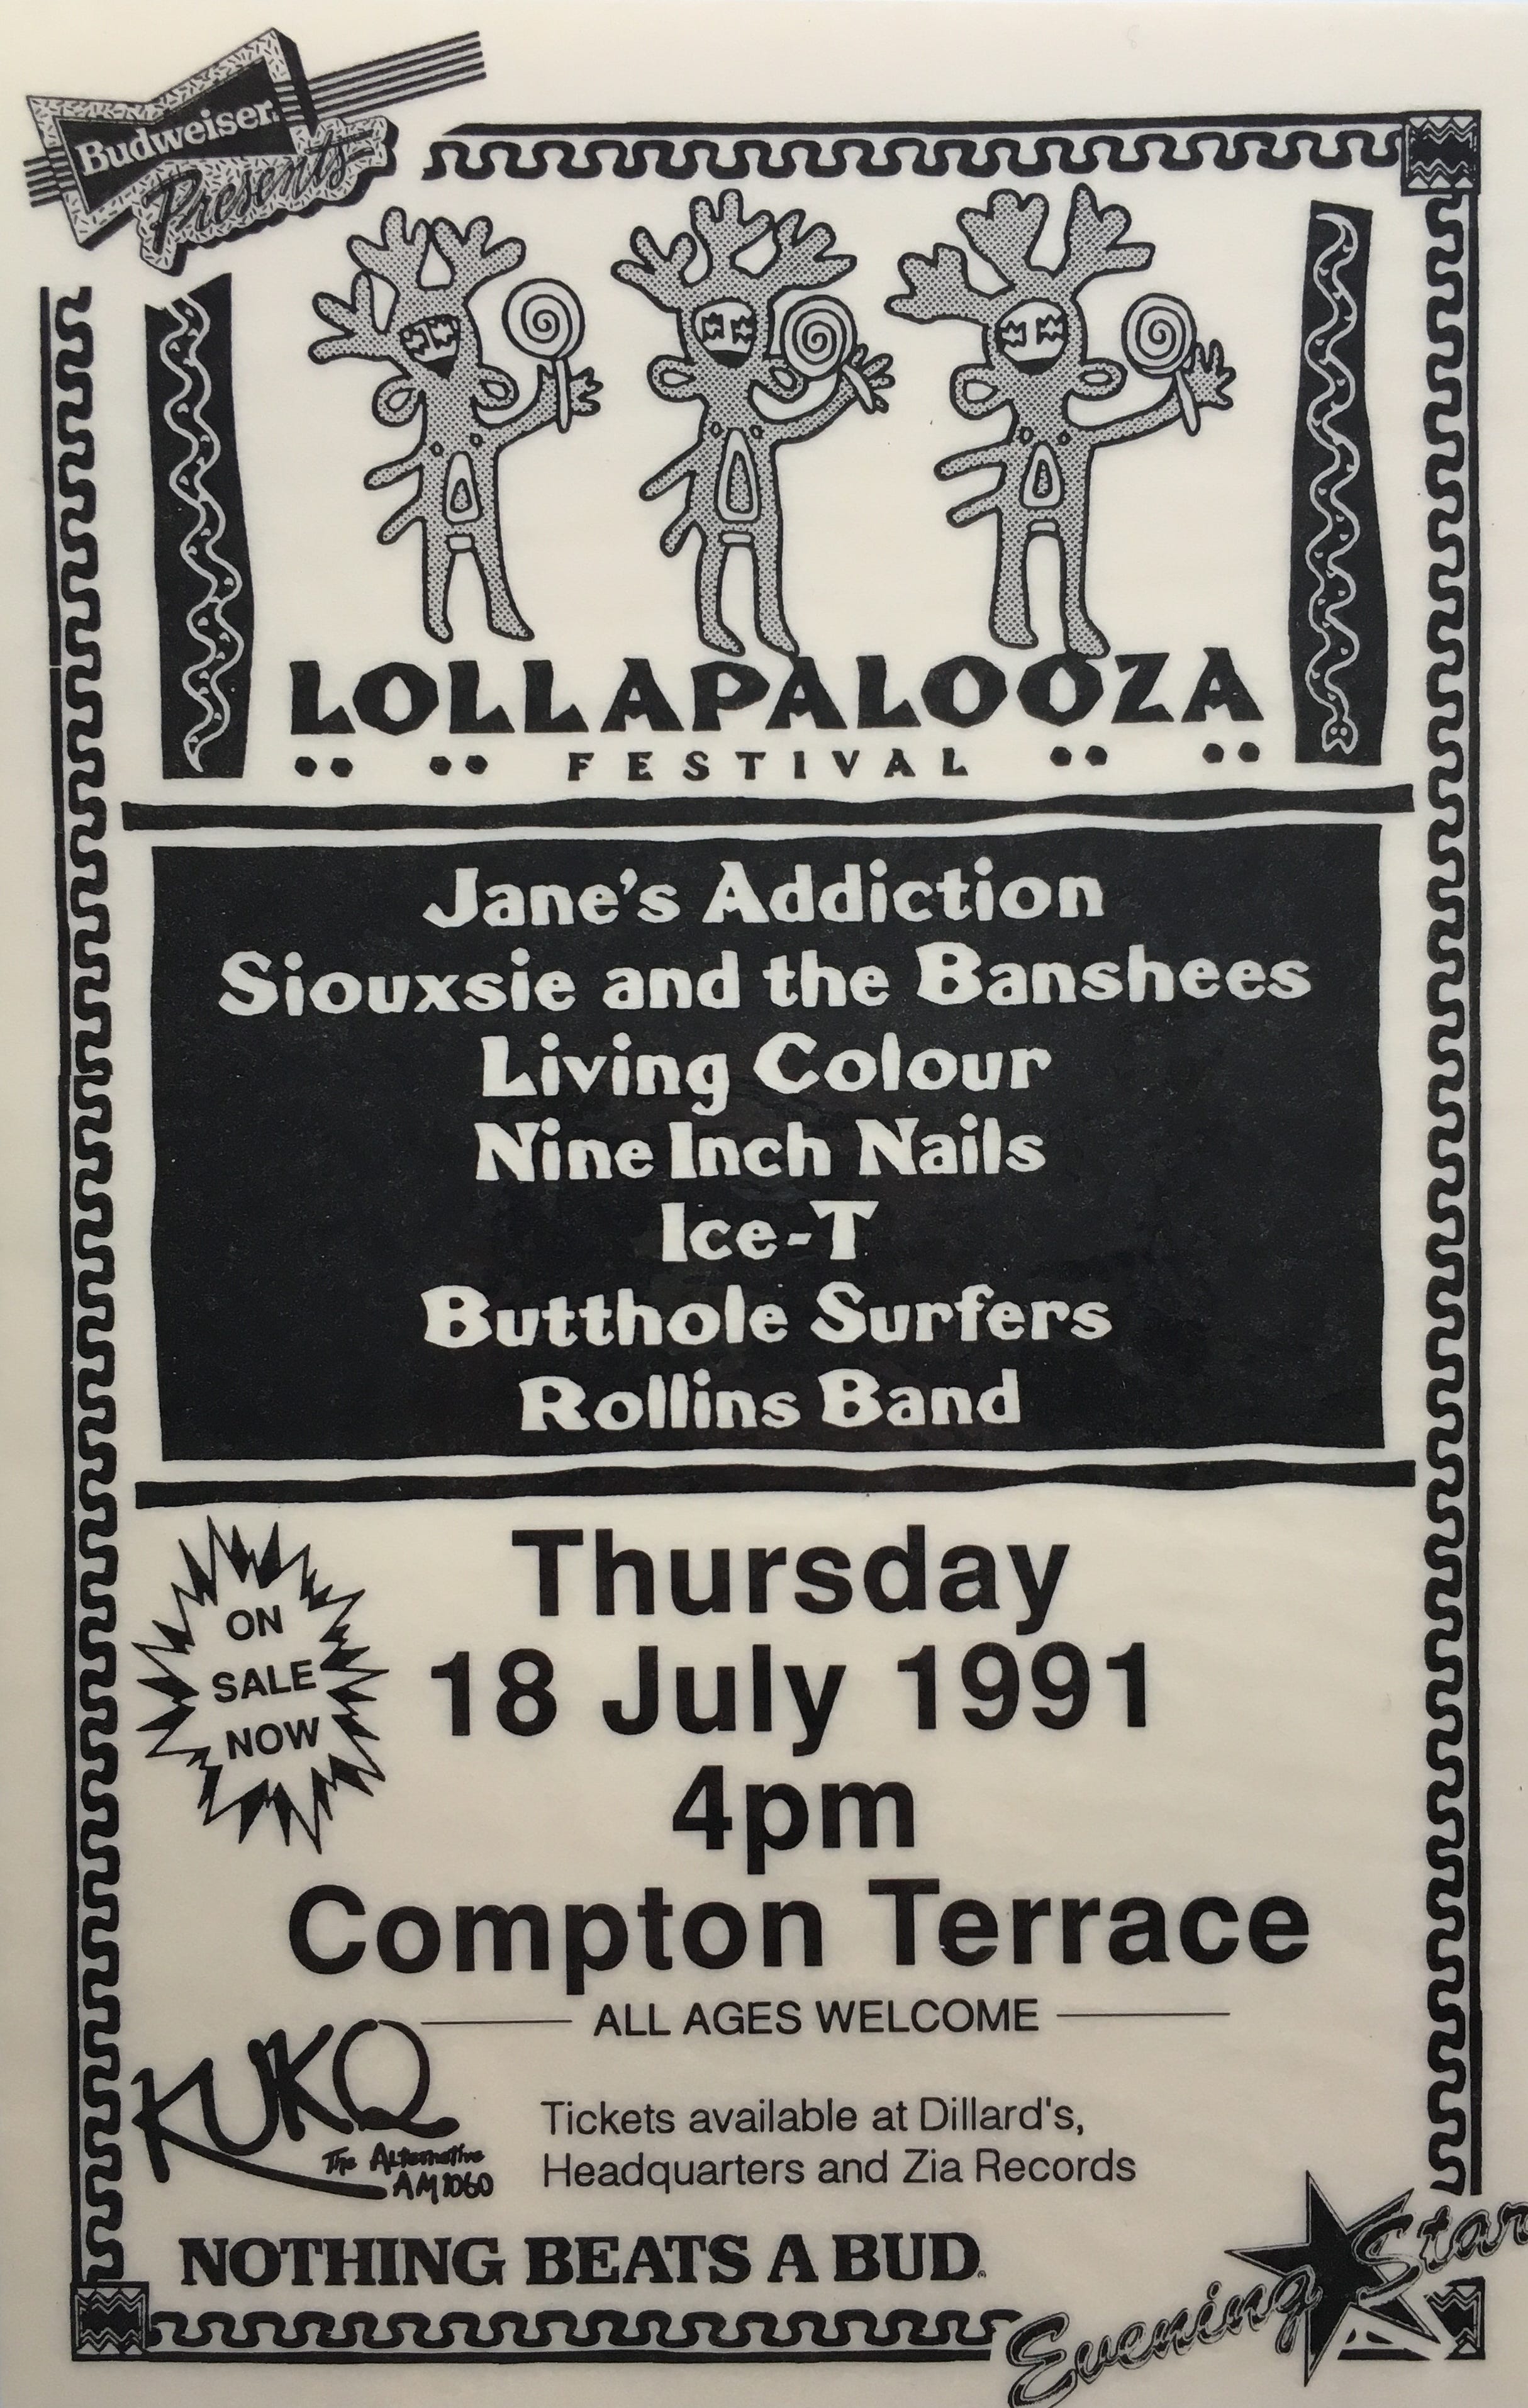 Lollapalooza: The First Show of the First Tour, what means lollapalooza 